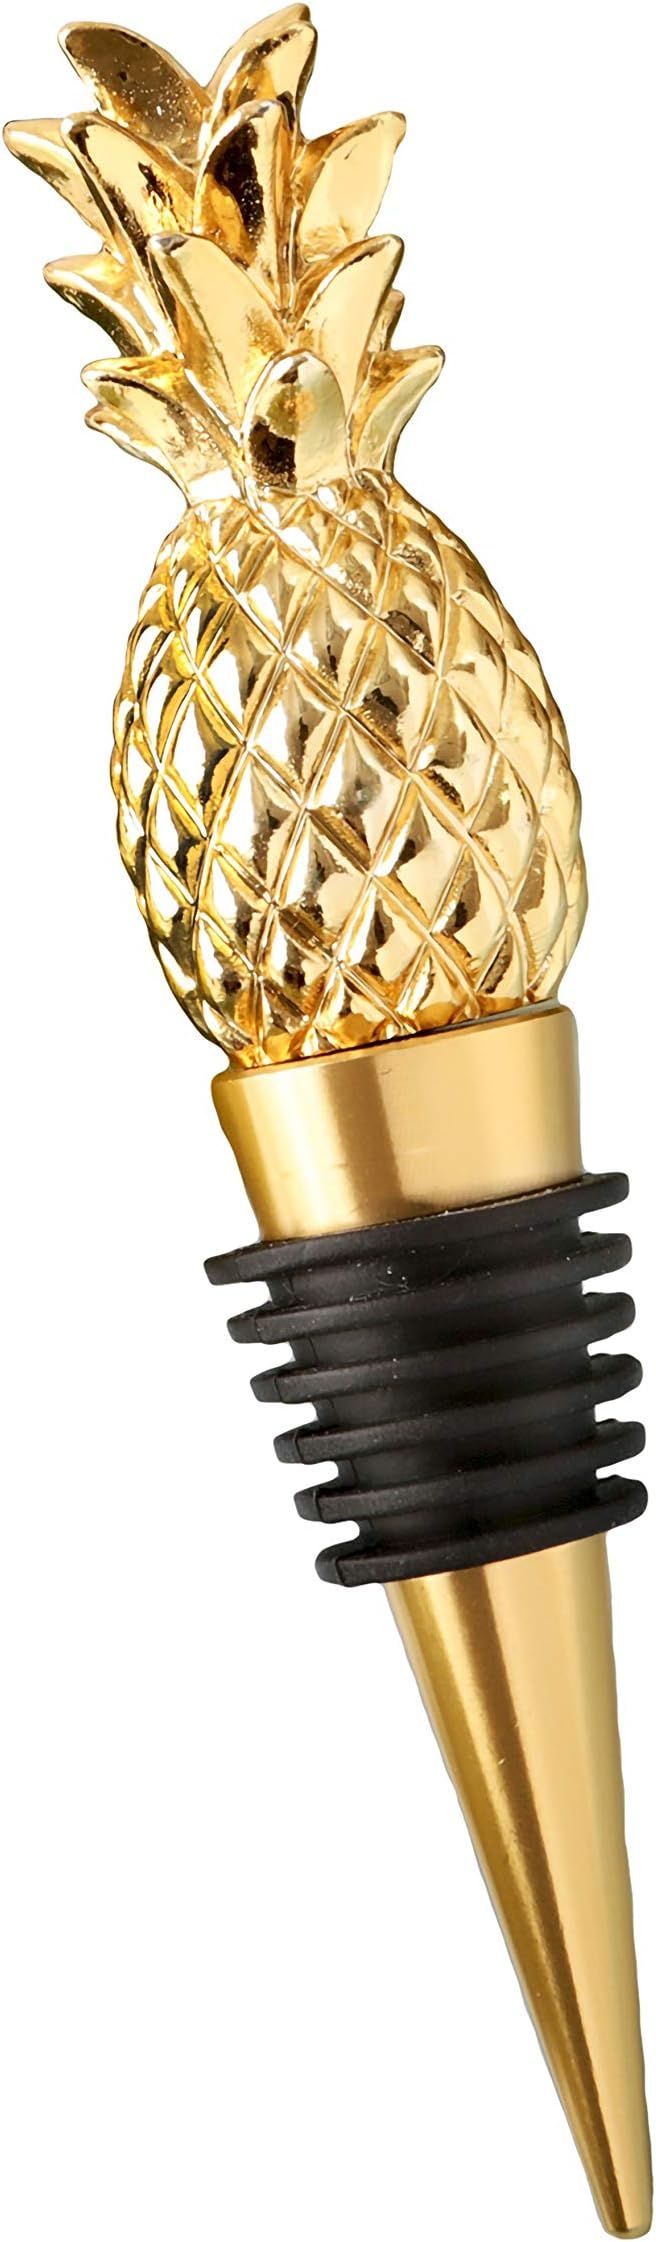 FASHIONCRAFT 1973 Pineapple Themed Gold Wine Bottle Stopper, Wine Themed Favors, Beach Themed Eve... | Amazon (US)